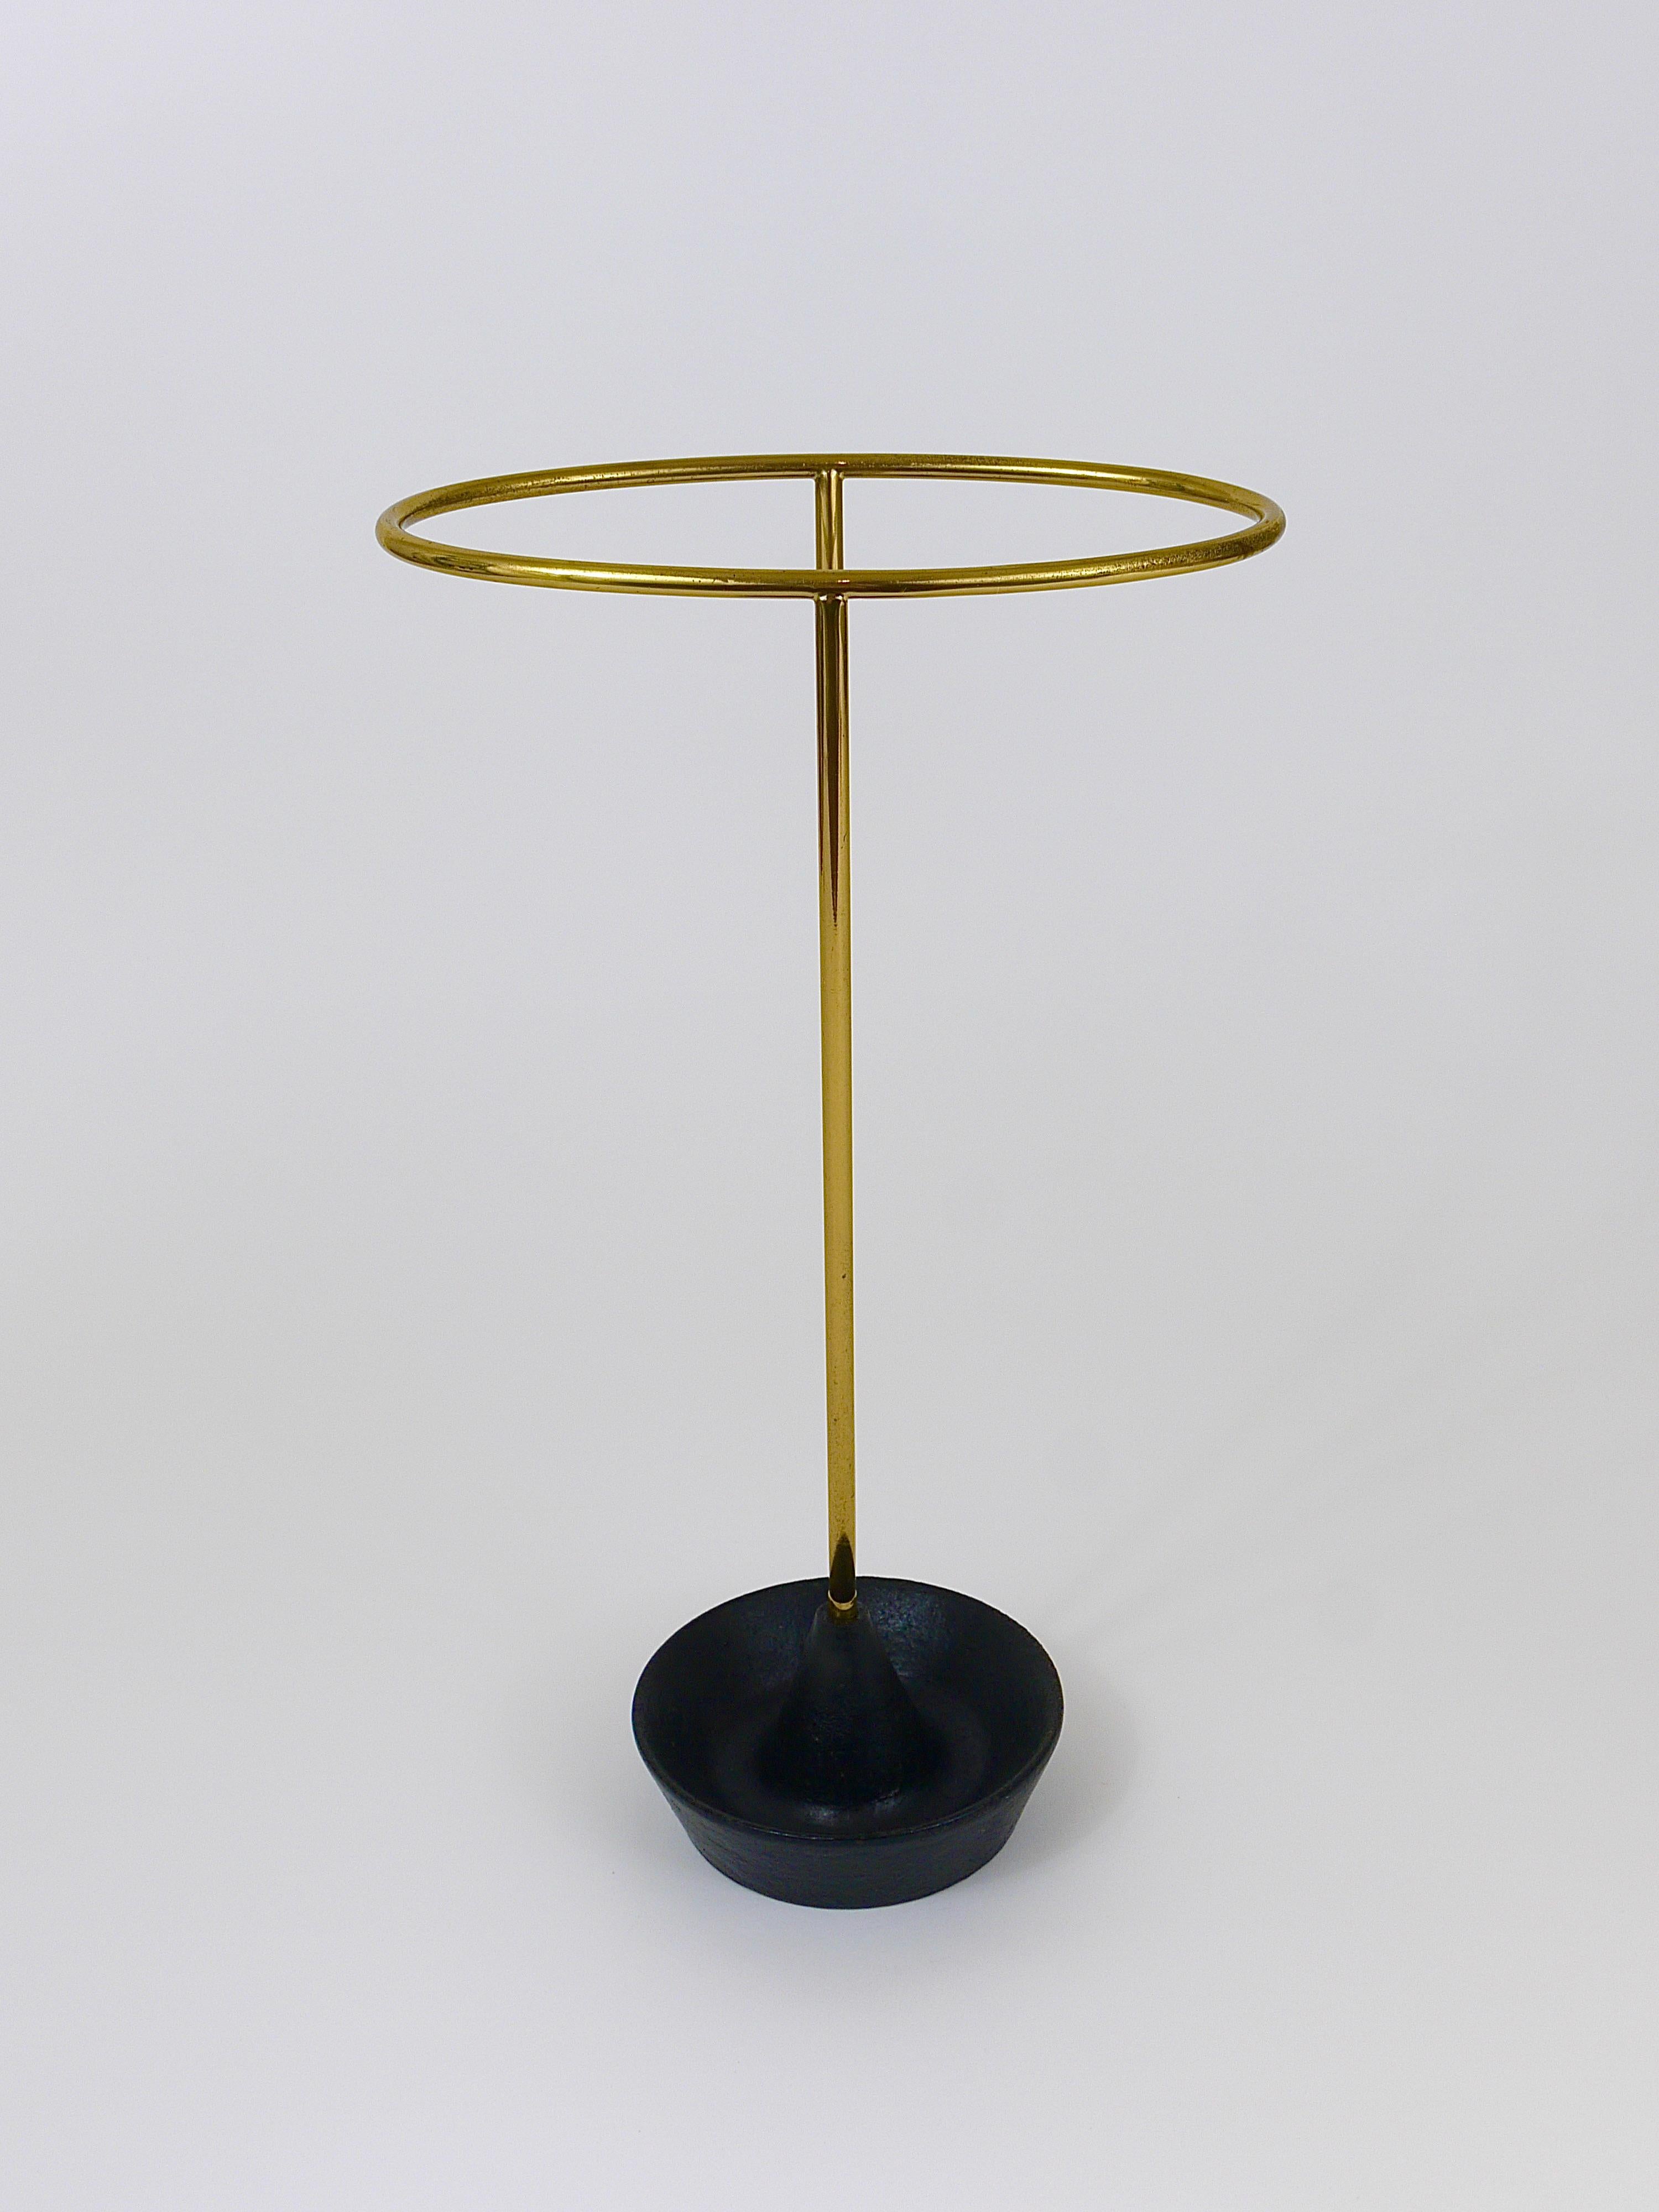 Carl Auböck Mid-Century Brass and Cast Iron Umbrella Stand, Austria, 1950s For Sale 7